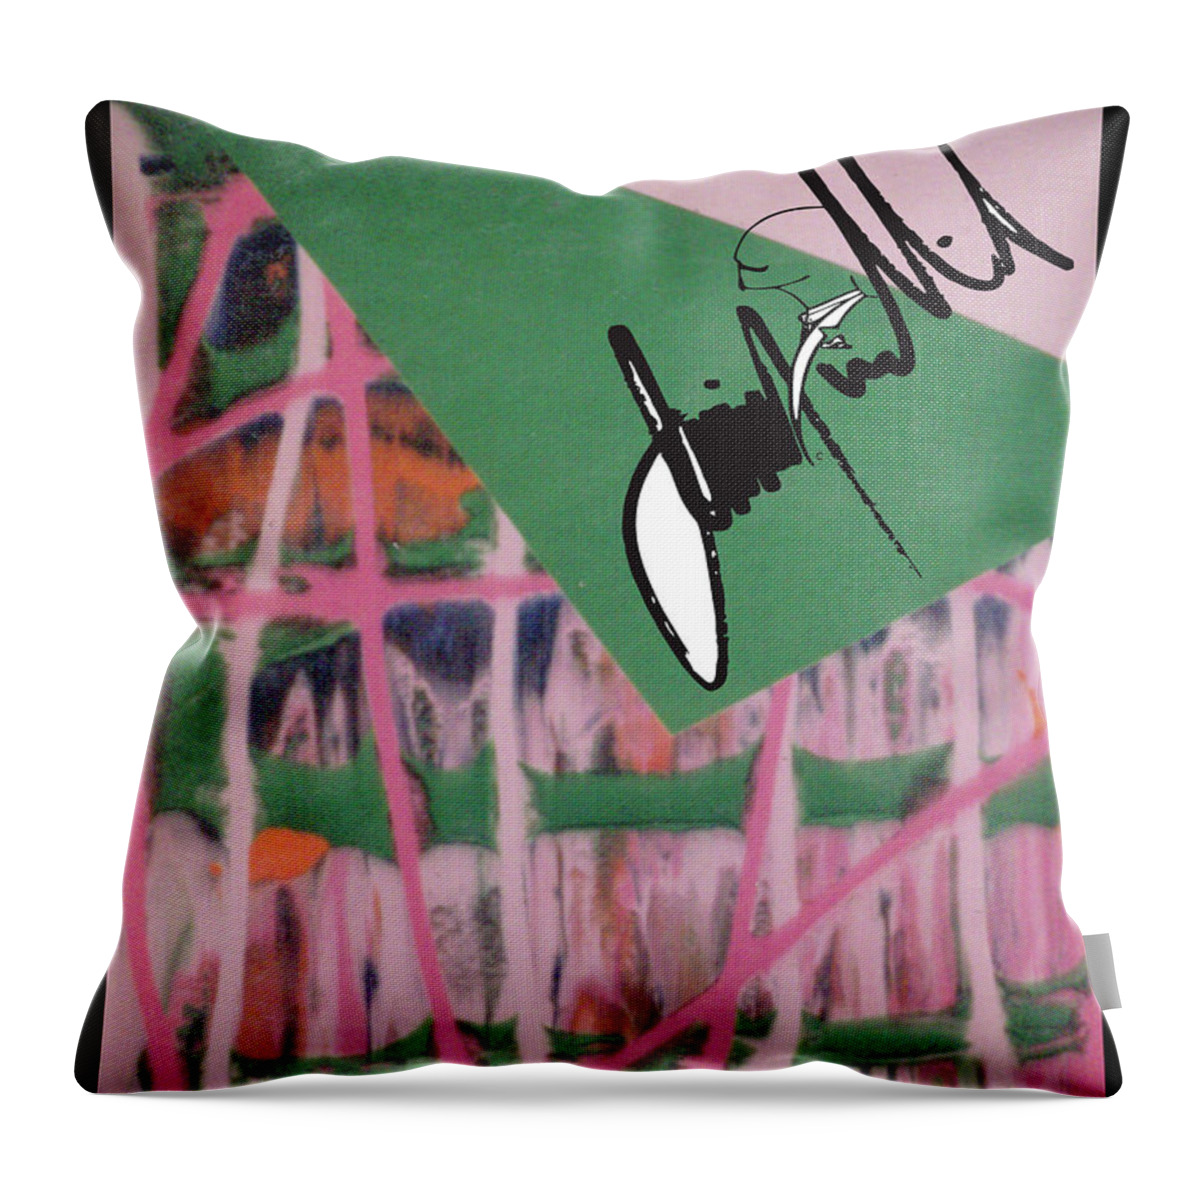  Throw Pillow featuring the digital art Flip by Jimmy Williams